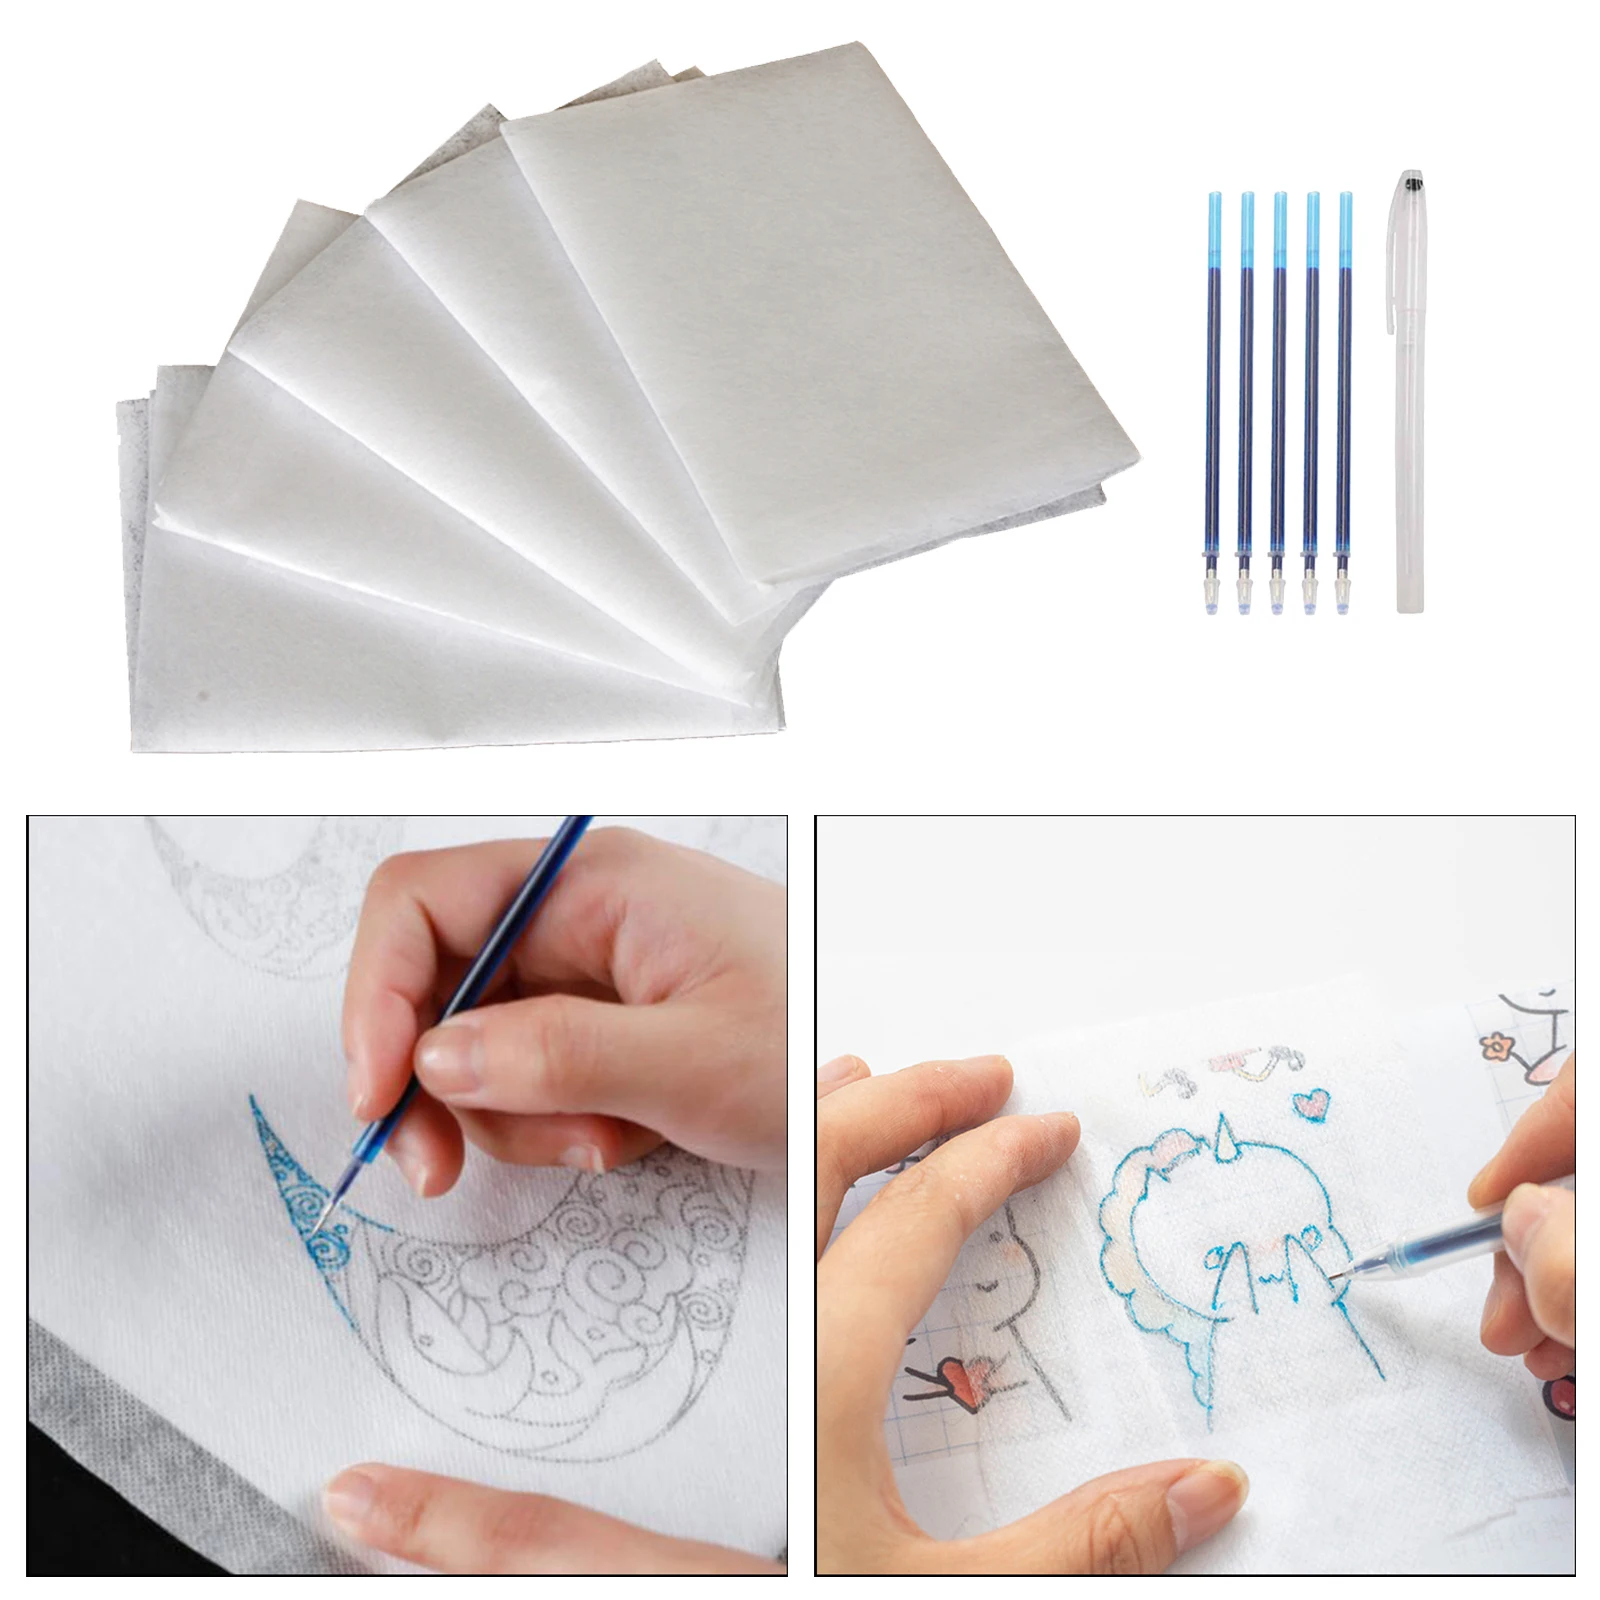 5 Sheets Water Soluble Embroidery Stabilizer Transfer Paper with Pen